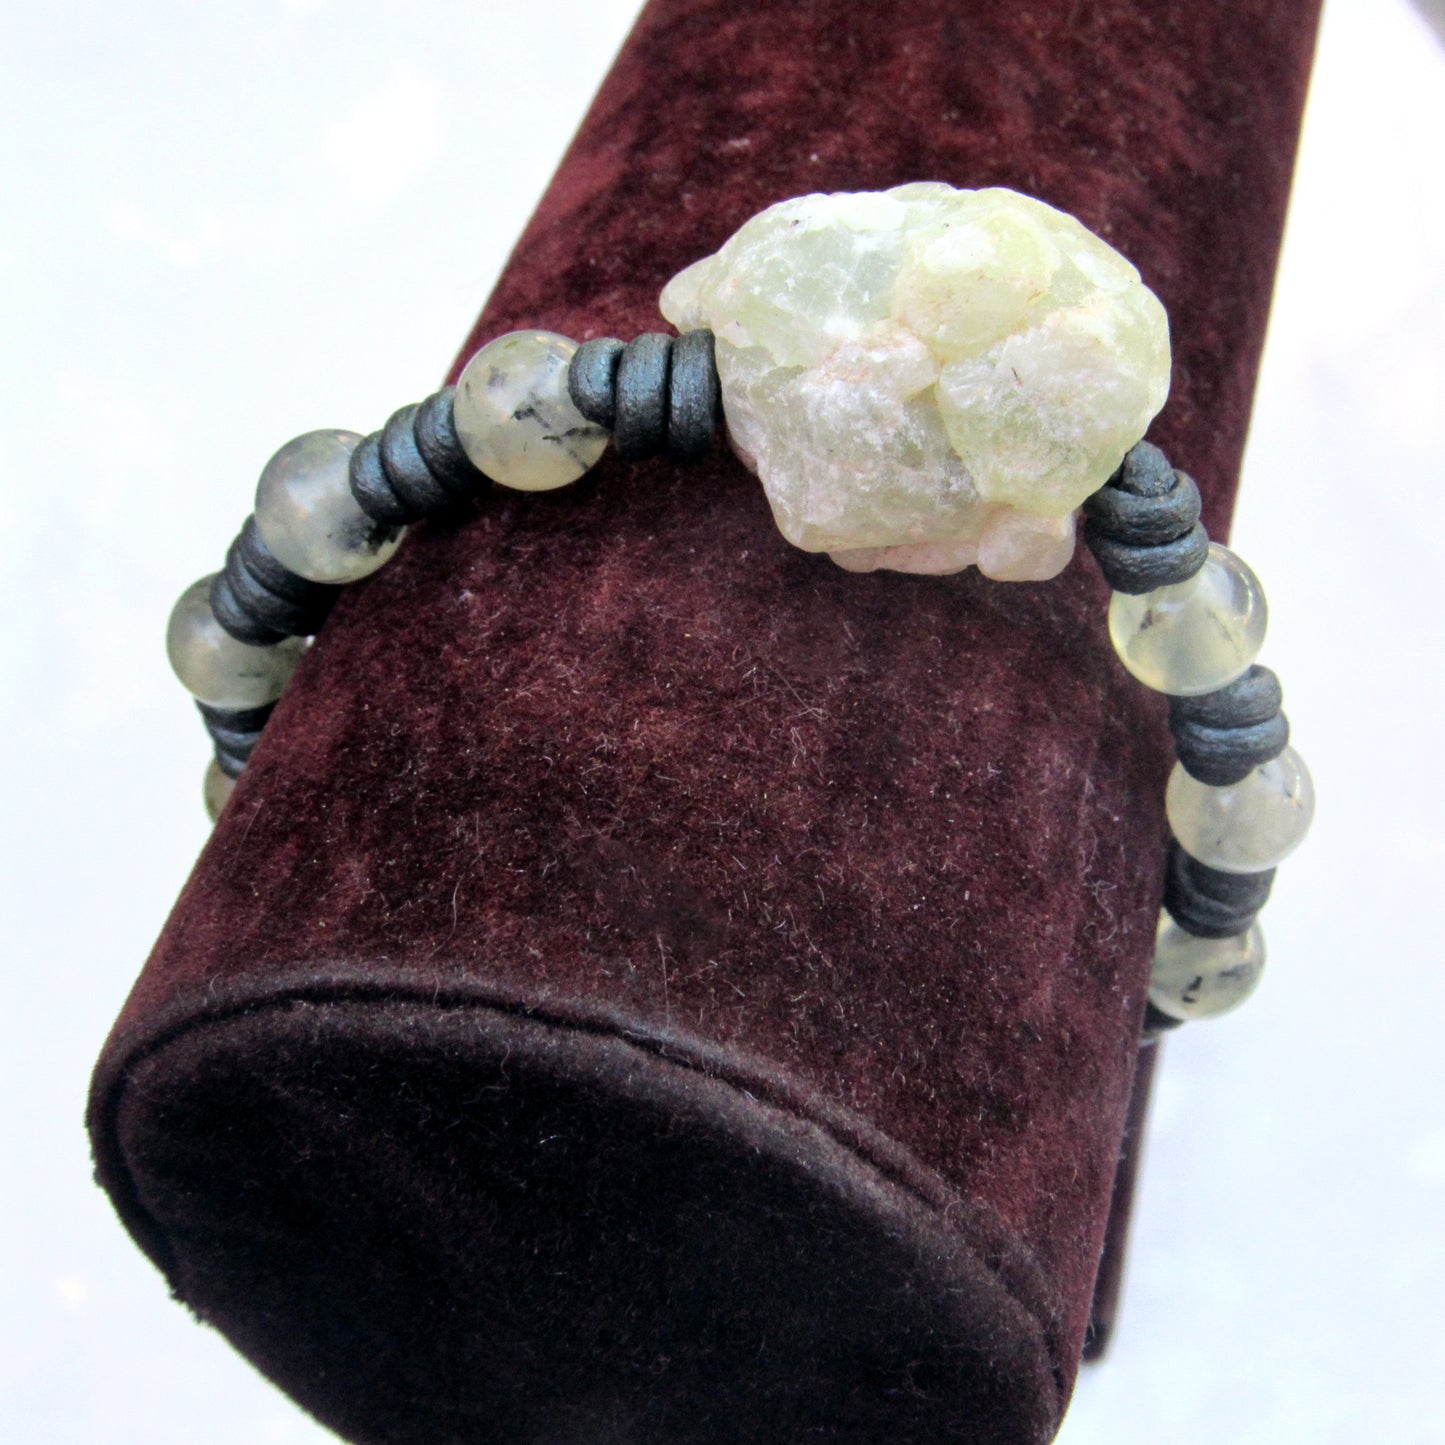 natural Prehnite gemstone on hand knotted leather bracelet